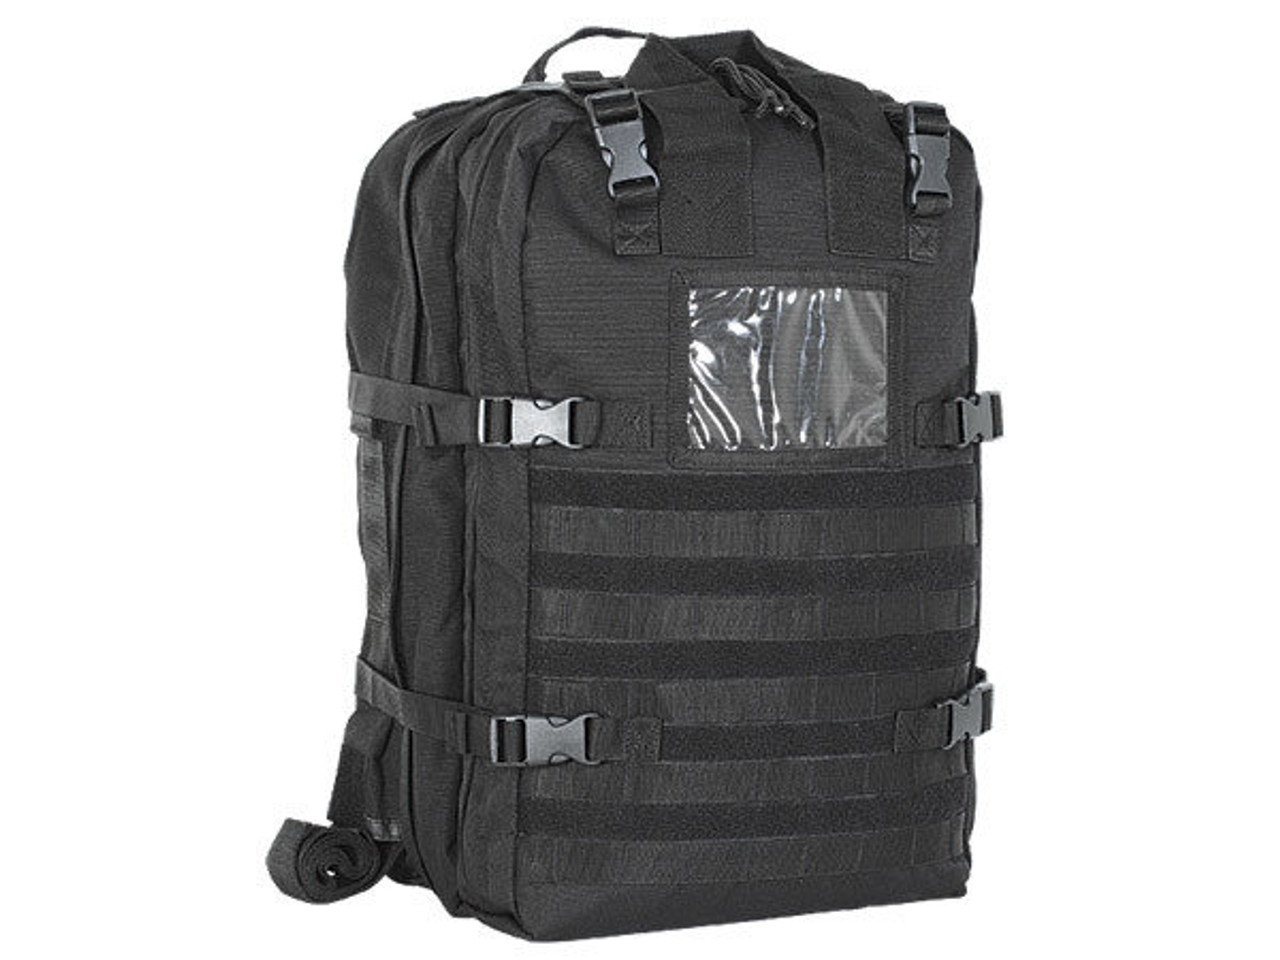 Military STOMP Medical First Aid Backpack - Full Kit | Live Action Safety